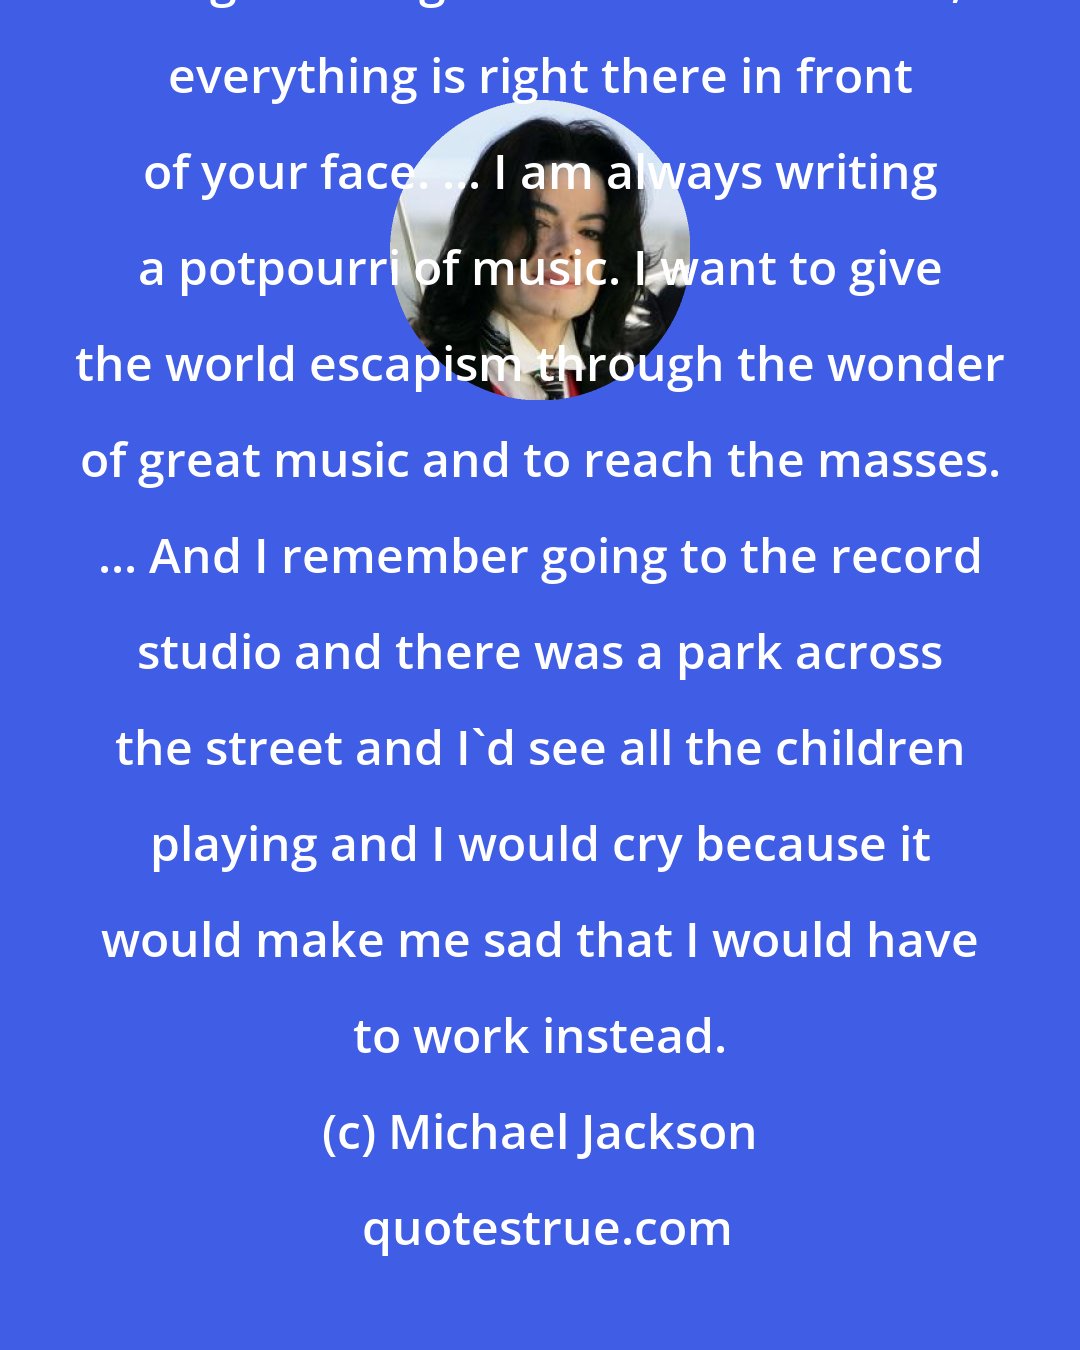 Michael Jackson: I wake up from dreams and go, 'Wow, put this down on paper.' The whole thing is strange. You hear the words, everything is right there in front of your face. ... I am always writing a potpourri of music. I want to give the world escapism through the wonder of great music and to reach the masses. ... And I remember going to the record studio and there was a park across the street and I'd see all the children playing and I would cry because it would make me sad that I would have to work instead.